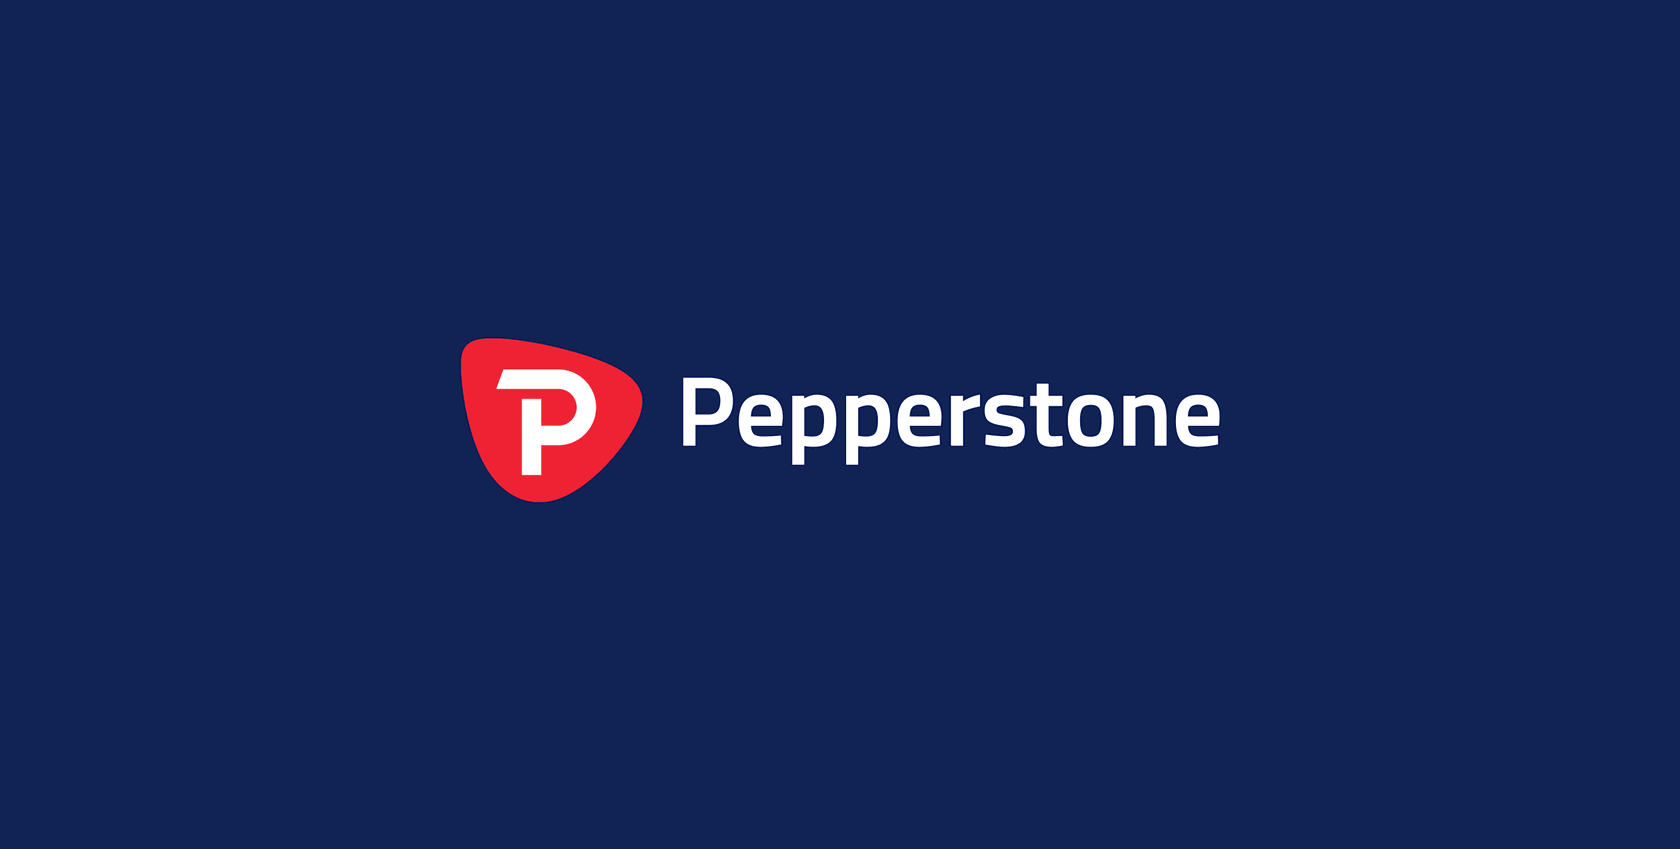 Pepperstone scores huge tennis deal: ATP Rankings and ATP Tour -  FinanceFeeds